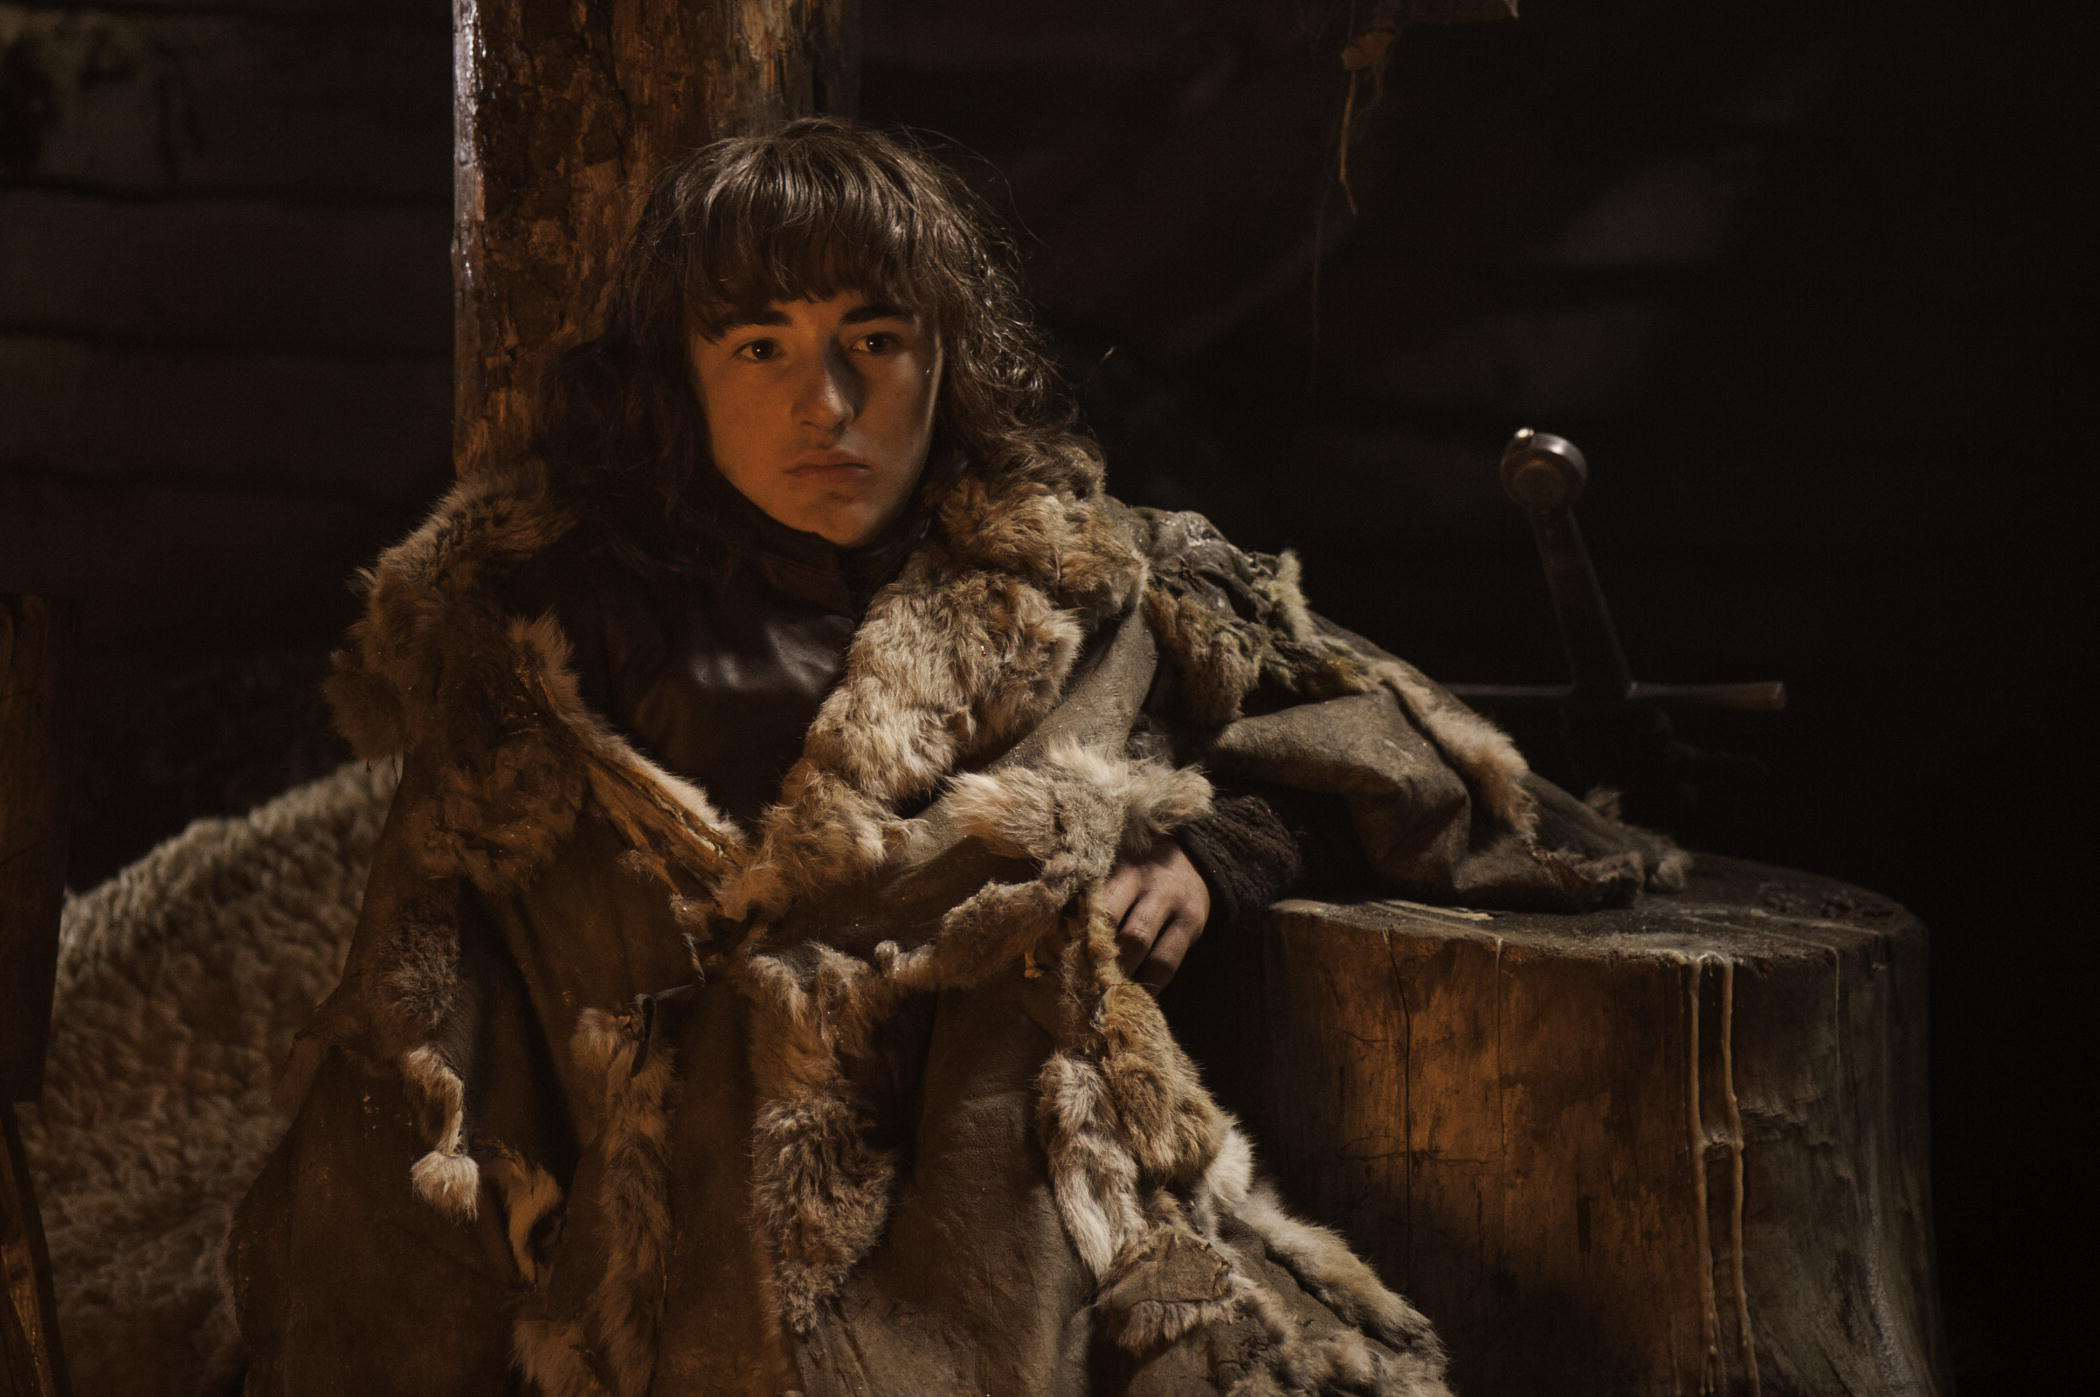 Isaac Hempstead Wright as Bran Stark on HBO's 'Game of Thrones' (HBO)